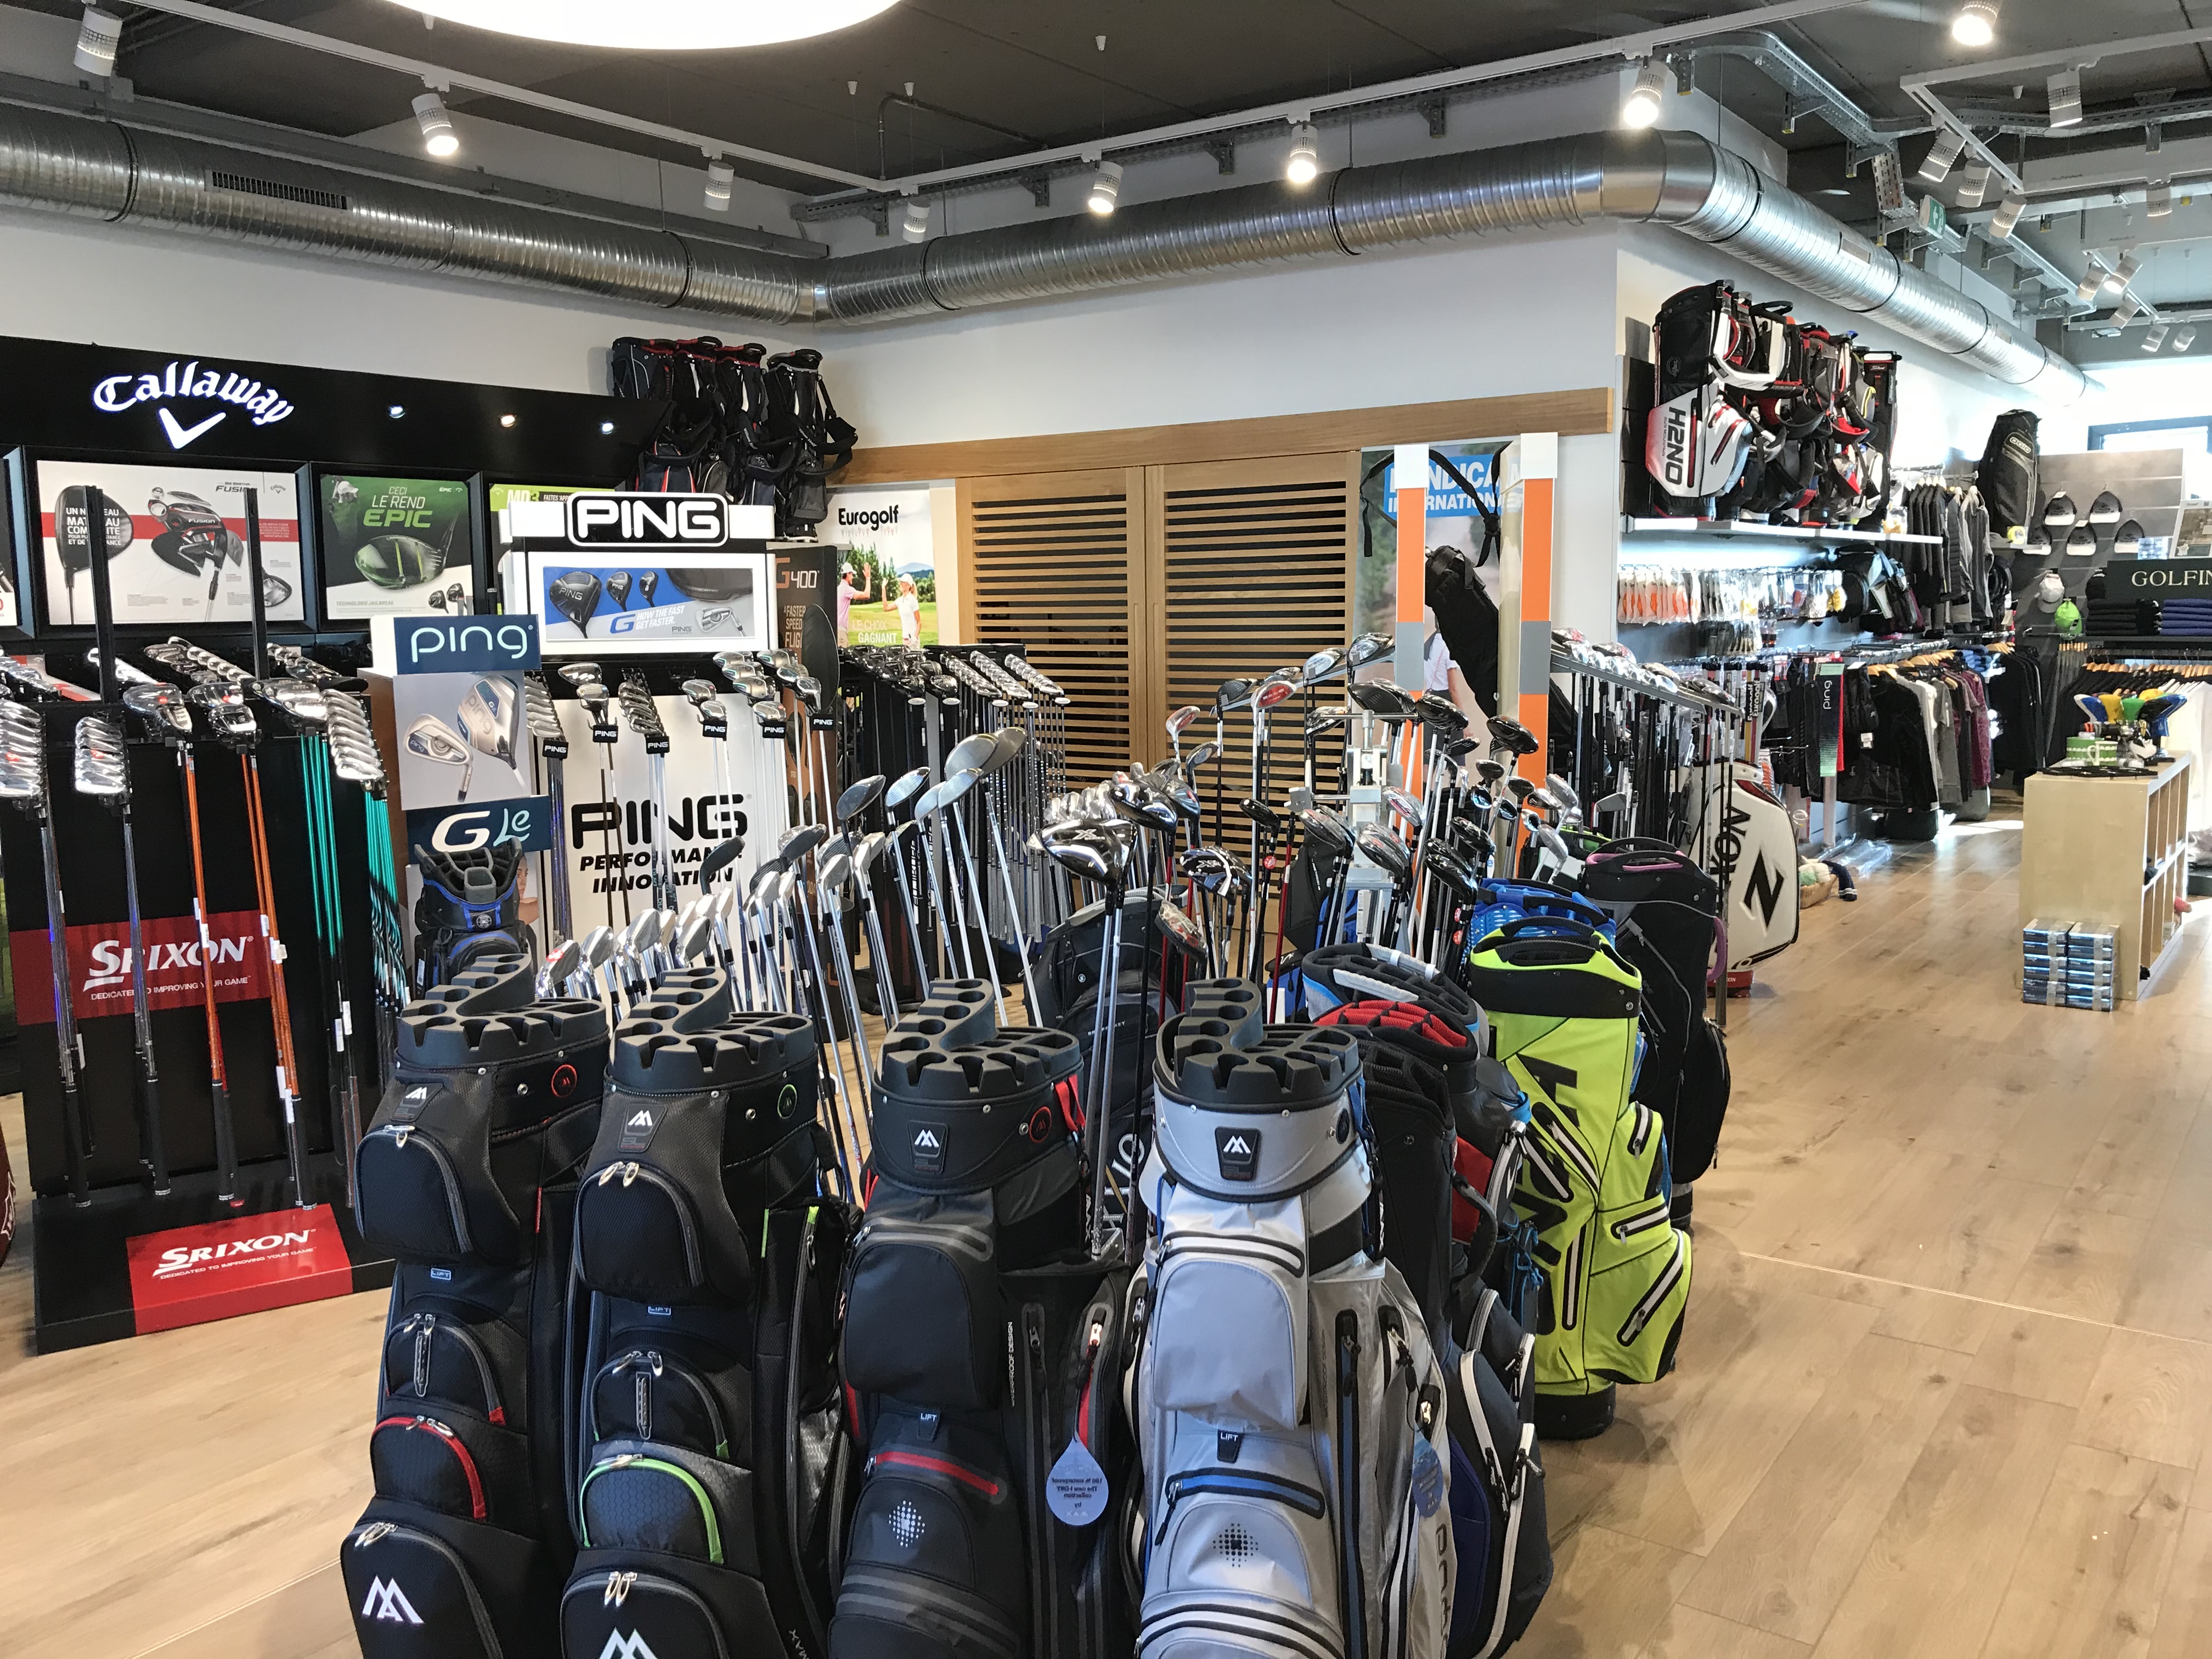 magasin golf tours nord